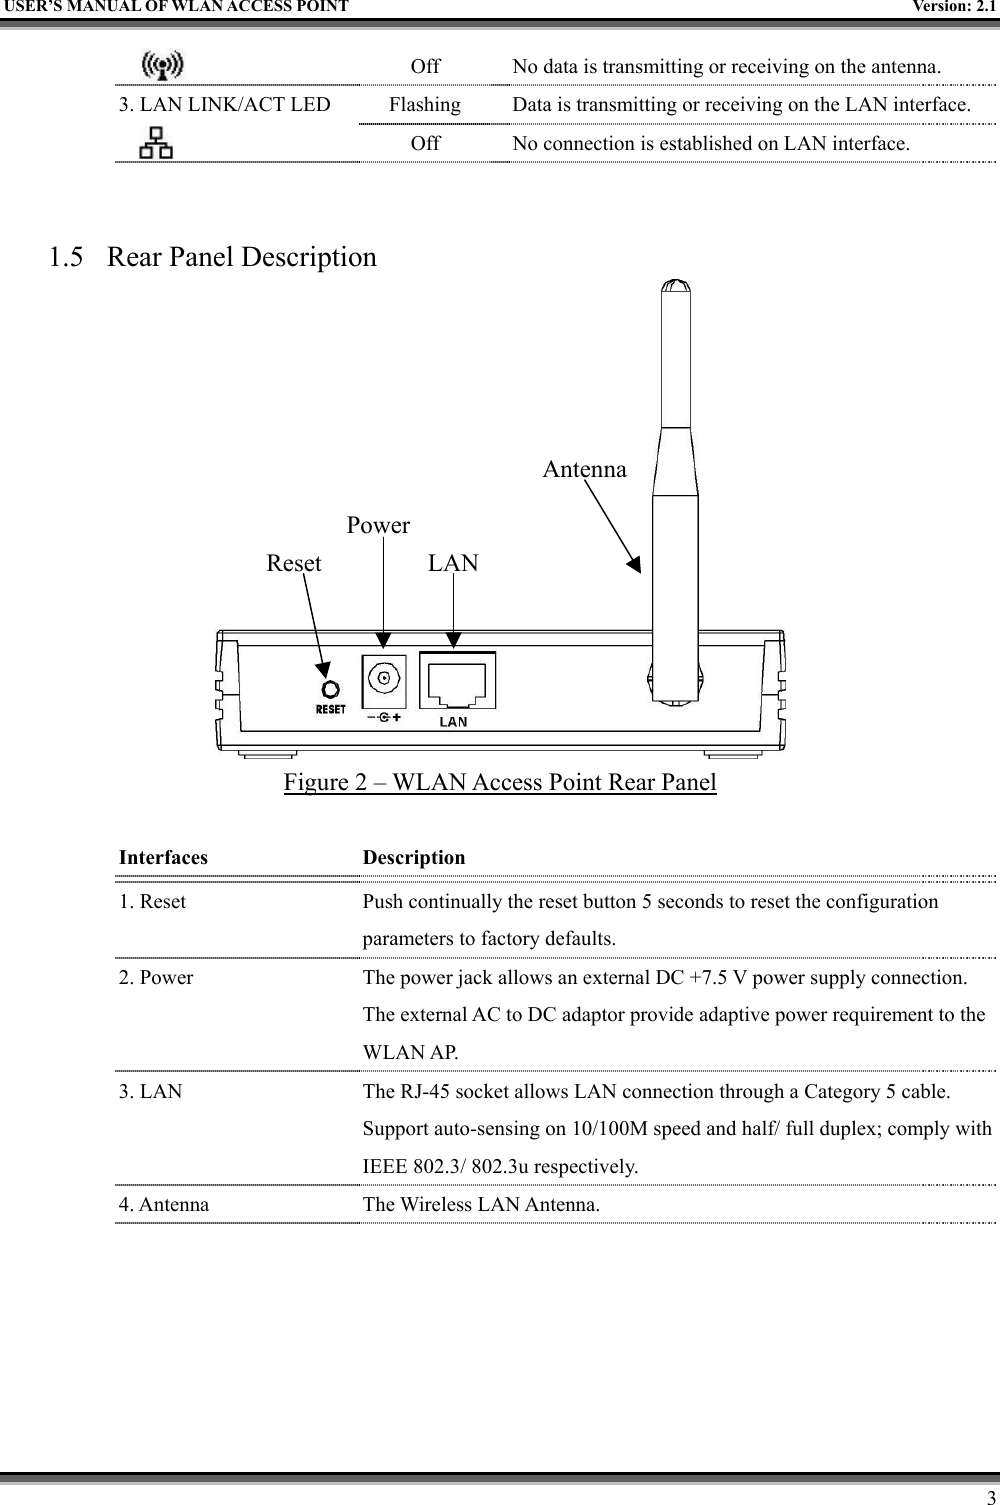   USER’S MANUAL OF WLAN ACCESS POINT    Version: 2.1     3    Off  No data is transmitting or receiving on the antenna. 3. LAN LINK/ACT LED    Flashing  Data is transmitting or receiving on the LAN interface.       Off  No connection is established on LAN interface.   1.5  Rear Panel Description  Figure 2 – WLAN Access Point Rear Panel  Interfaces  Description 1. Reset    Push continually the reset button 5 seconds to reset the configuration parameters to factory defaults.   2. Power    The power jack allows an external DC +7.5 V power supply connection. The external AC to DC adaptor provide adaptive power requirement to the WLAN AP. 3. LAN    The RJ-45 socket allows LAN connection through a Category 5 cable. Support auto-sensing on 10/100M speed and half/ full duplex; comply with IEEE 802.3/ 802.3u respectively. 4. Antenna    The Wireless LAN Antenna.   Reset PowerLANAntenna